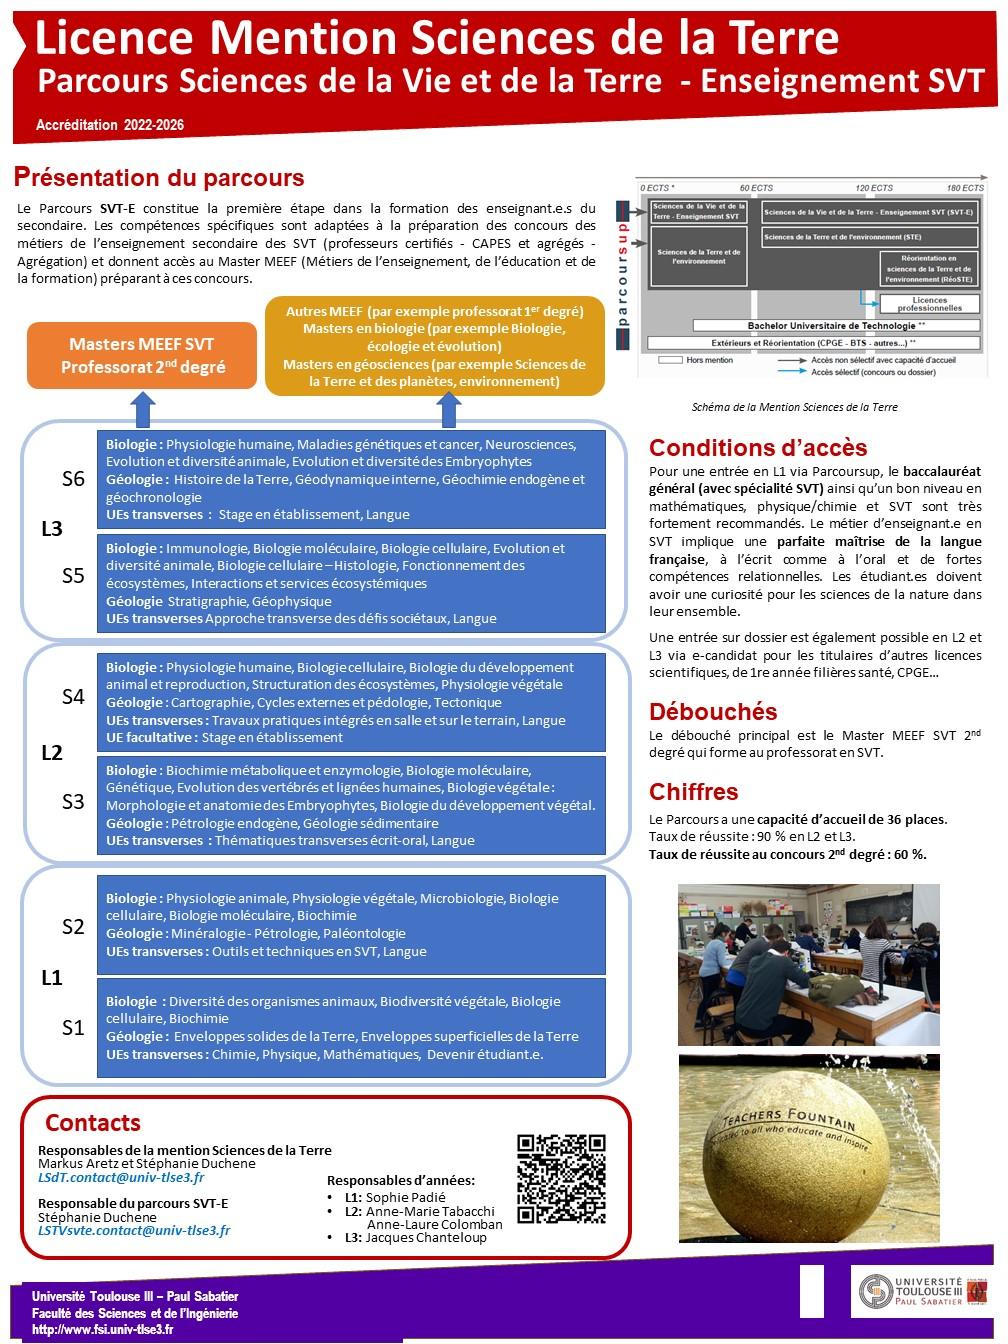 Poster Licence SDT parcours SVTE